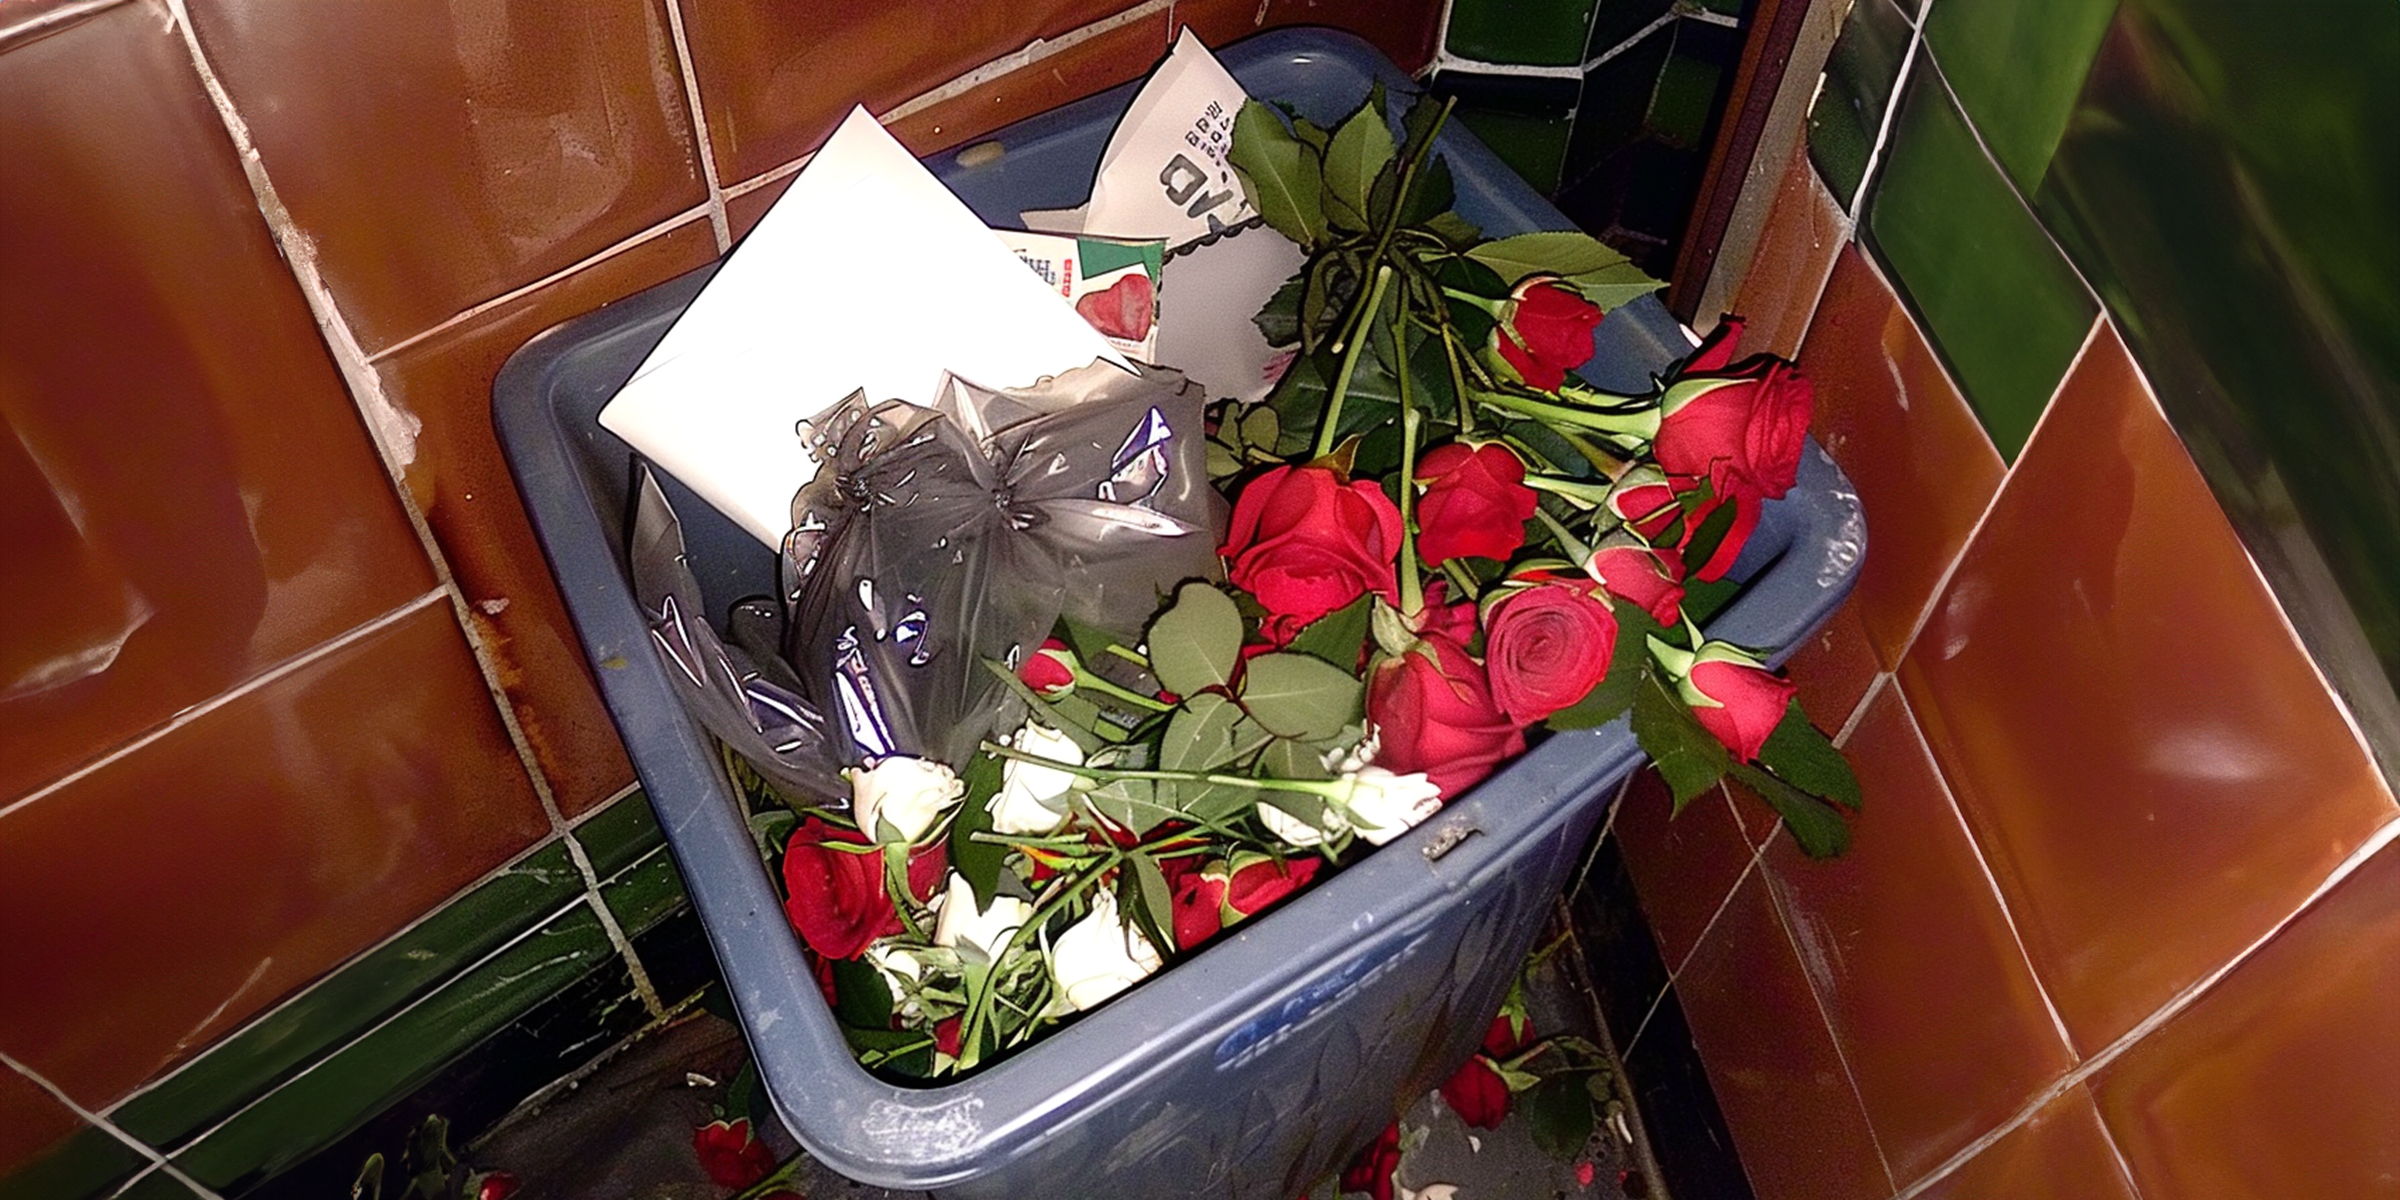 Roses in a trash can | Source: AmoMama